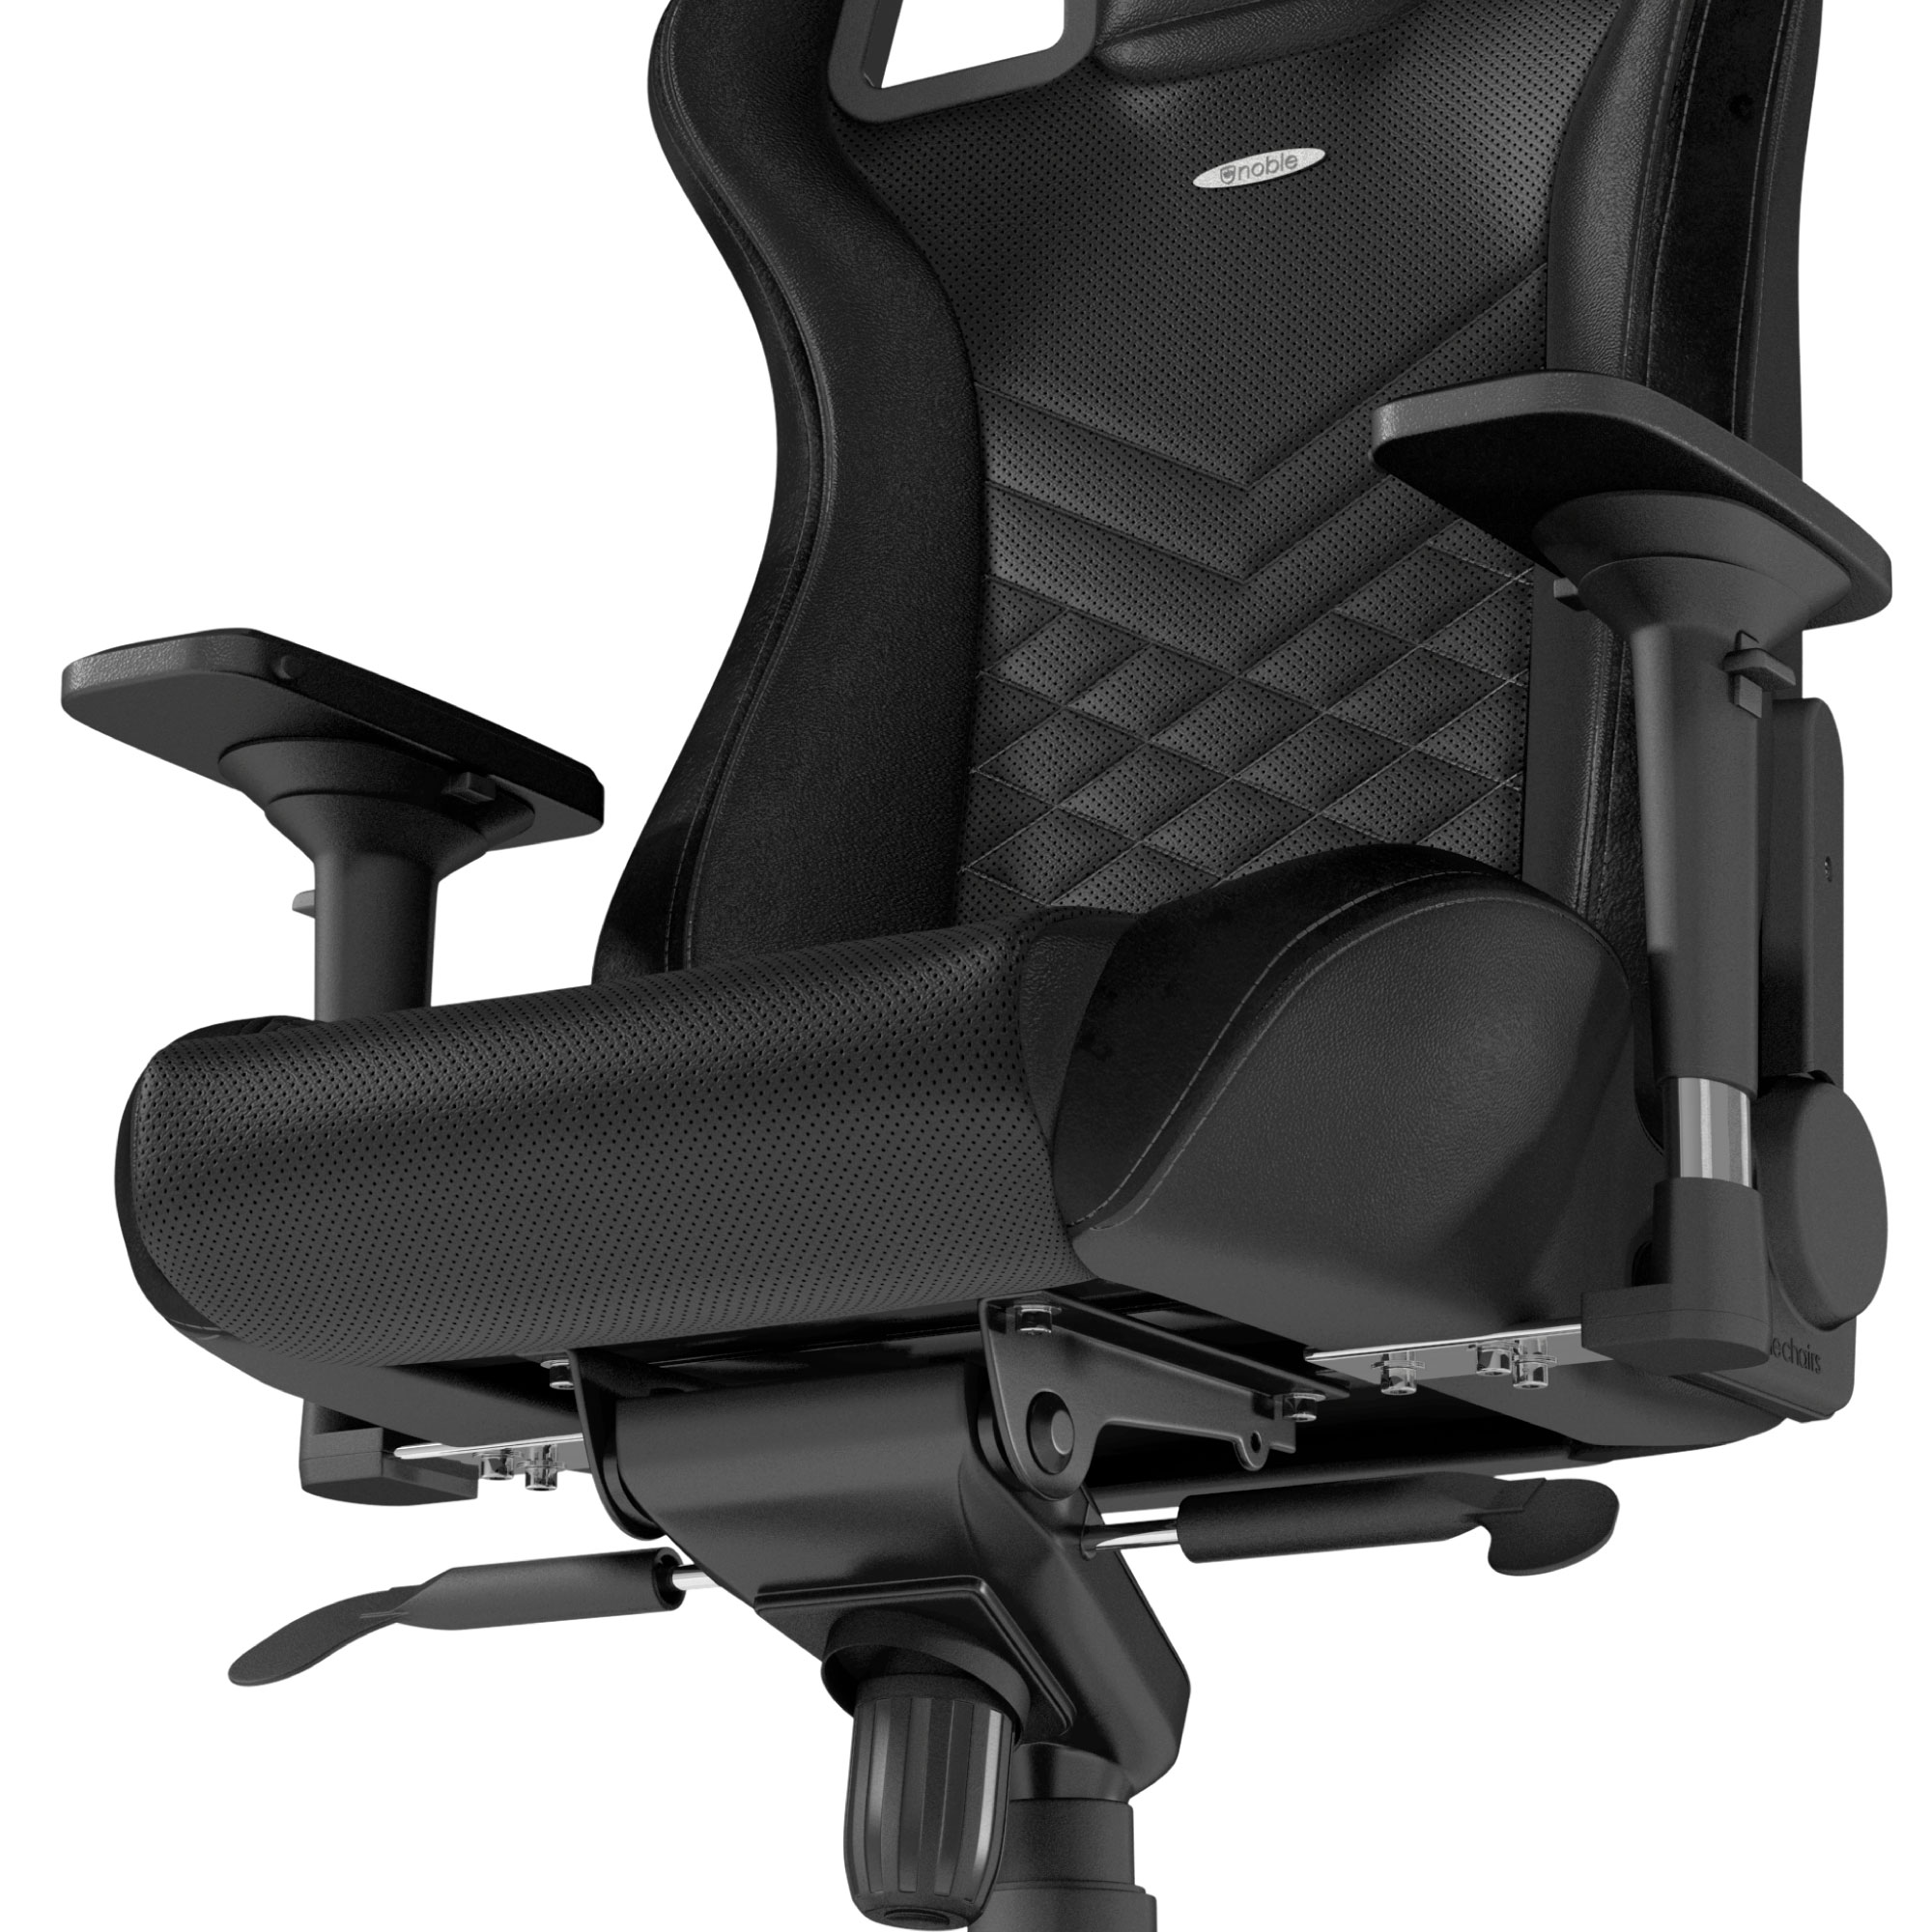 noblechairs EPIC - ゲーミングチェア - 株式会社アーキサイト